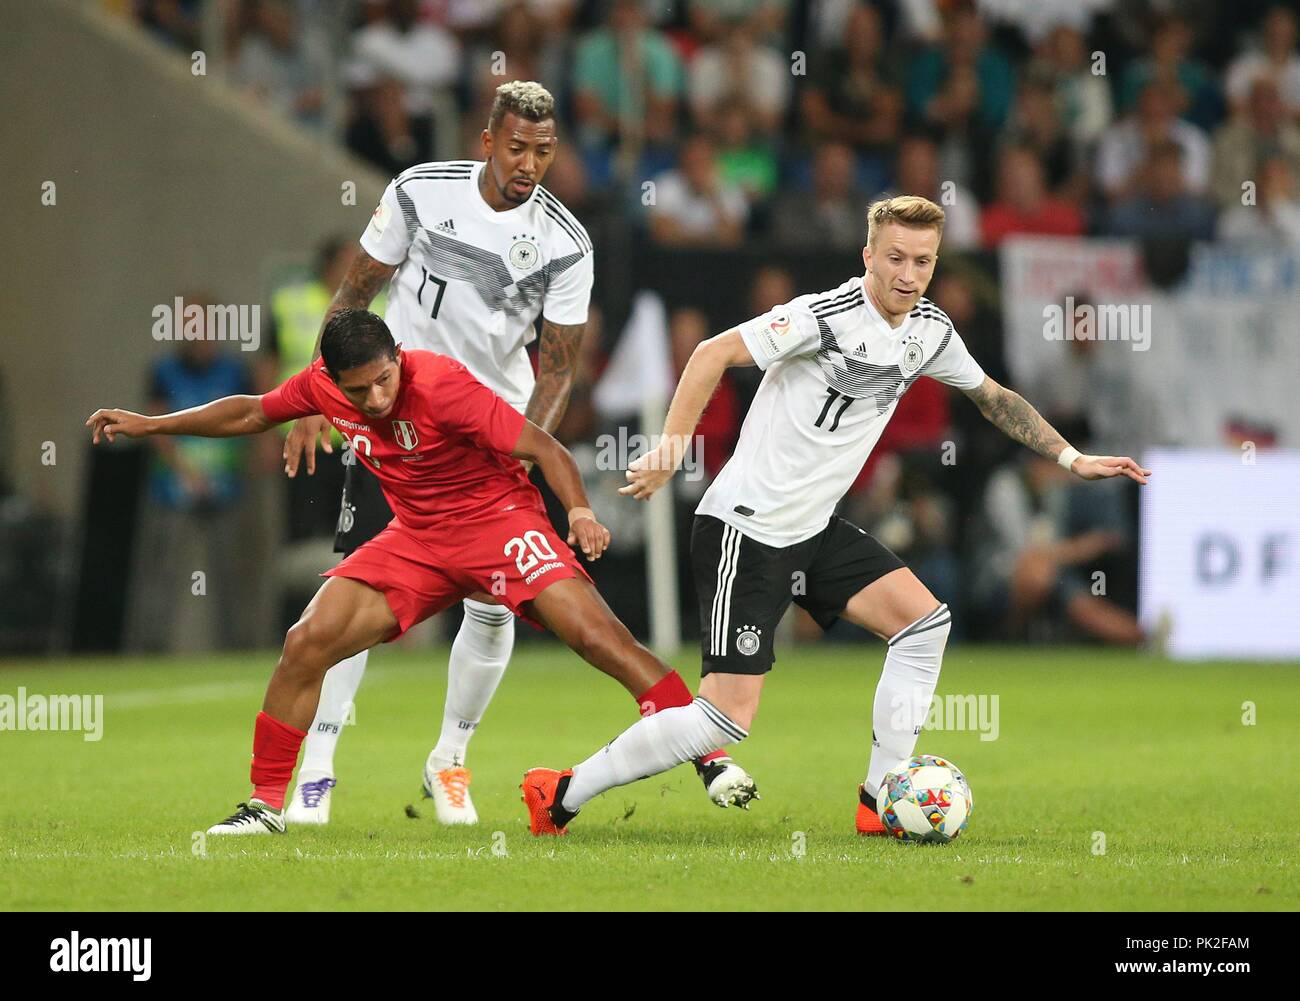 firo: 09.09.2018 Football, Soccer, National Team, Germany, Friendly Match, GER, Germany - Peru, 2: 1, duels, Edison FLORES, Peru, Jérôme BOATENG, DFB, Germany, Marco REUS, DFB, Germany, full figure, | usage worldwide Stock Photo